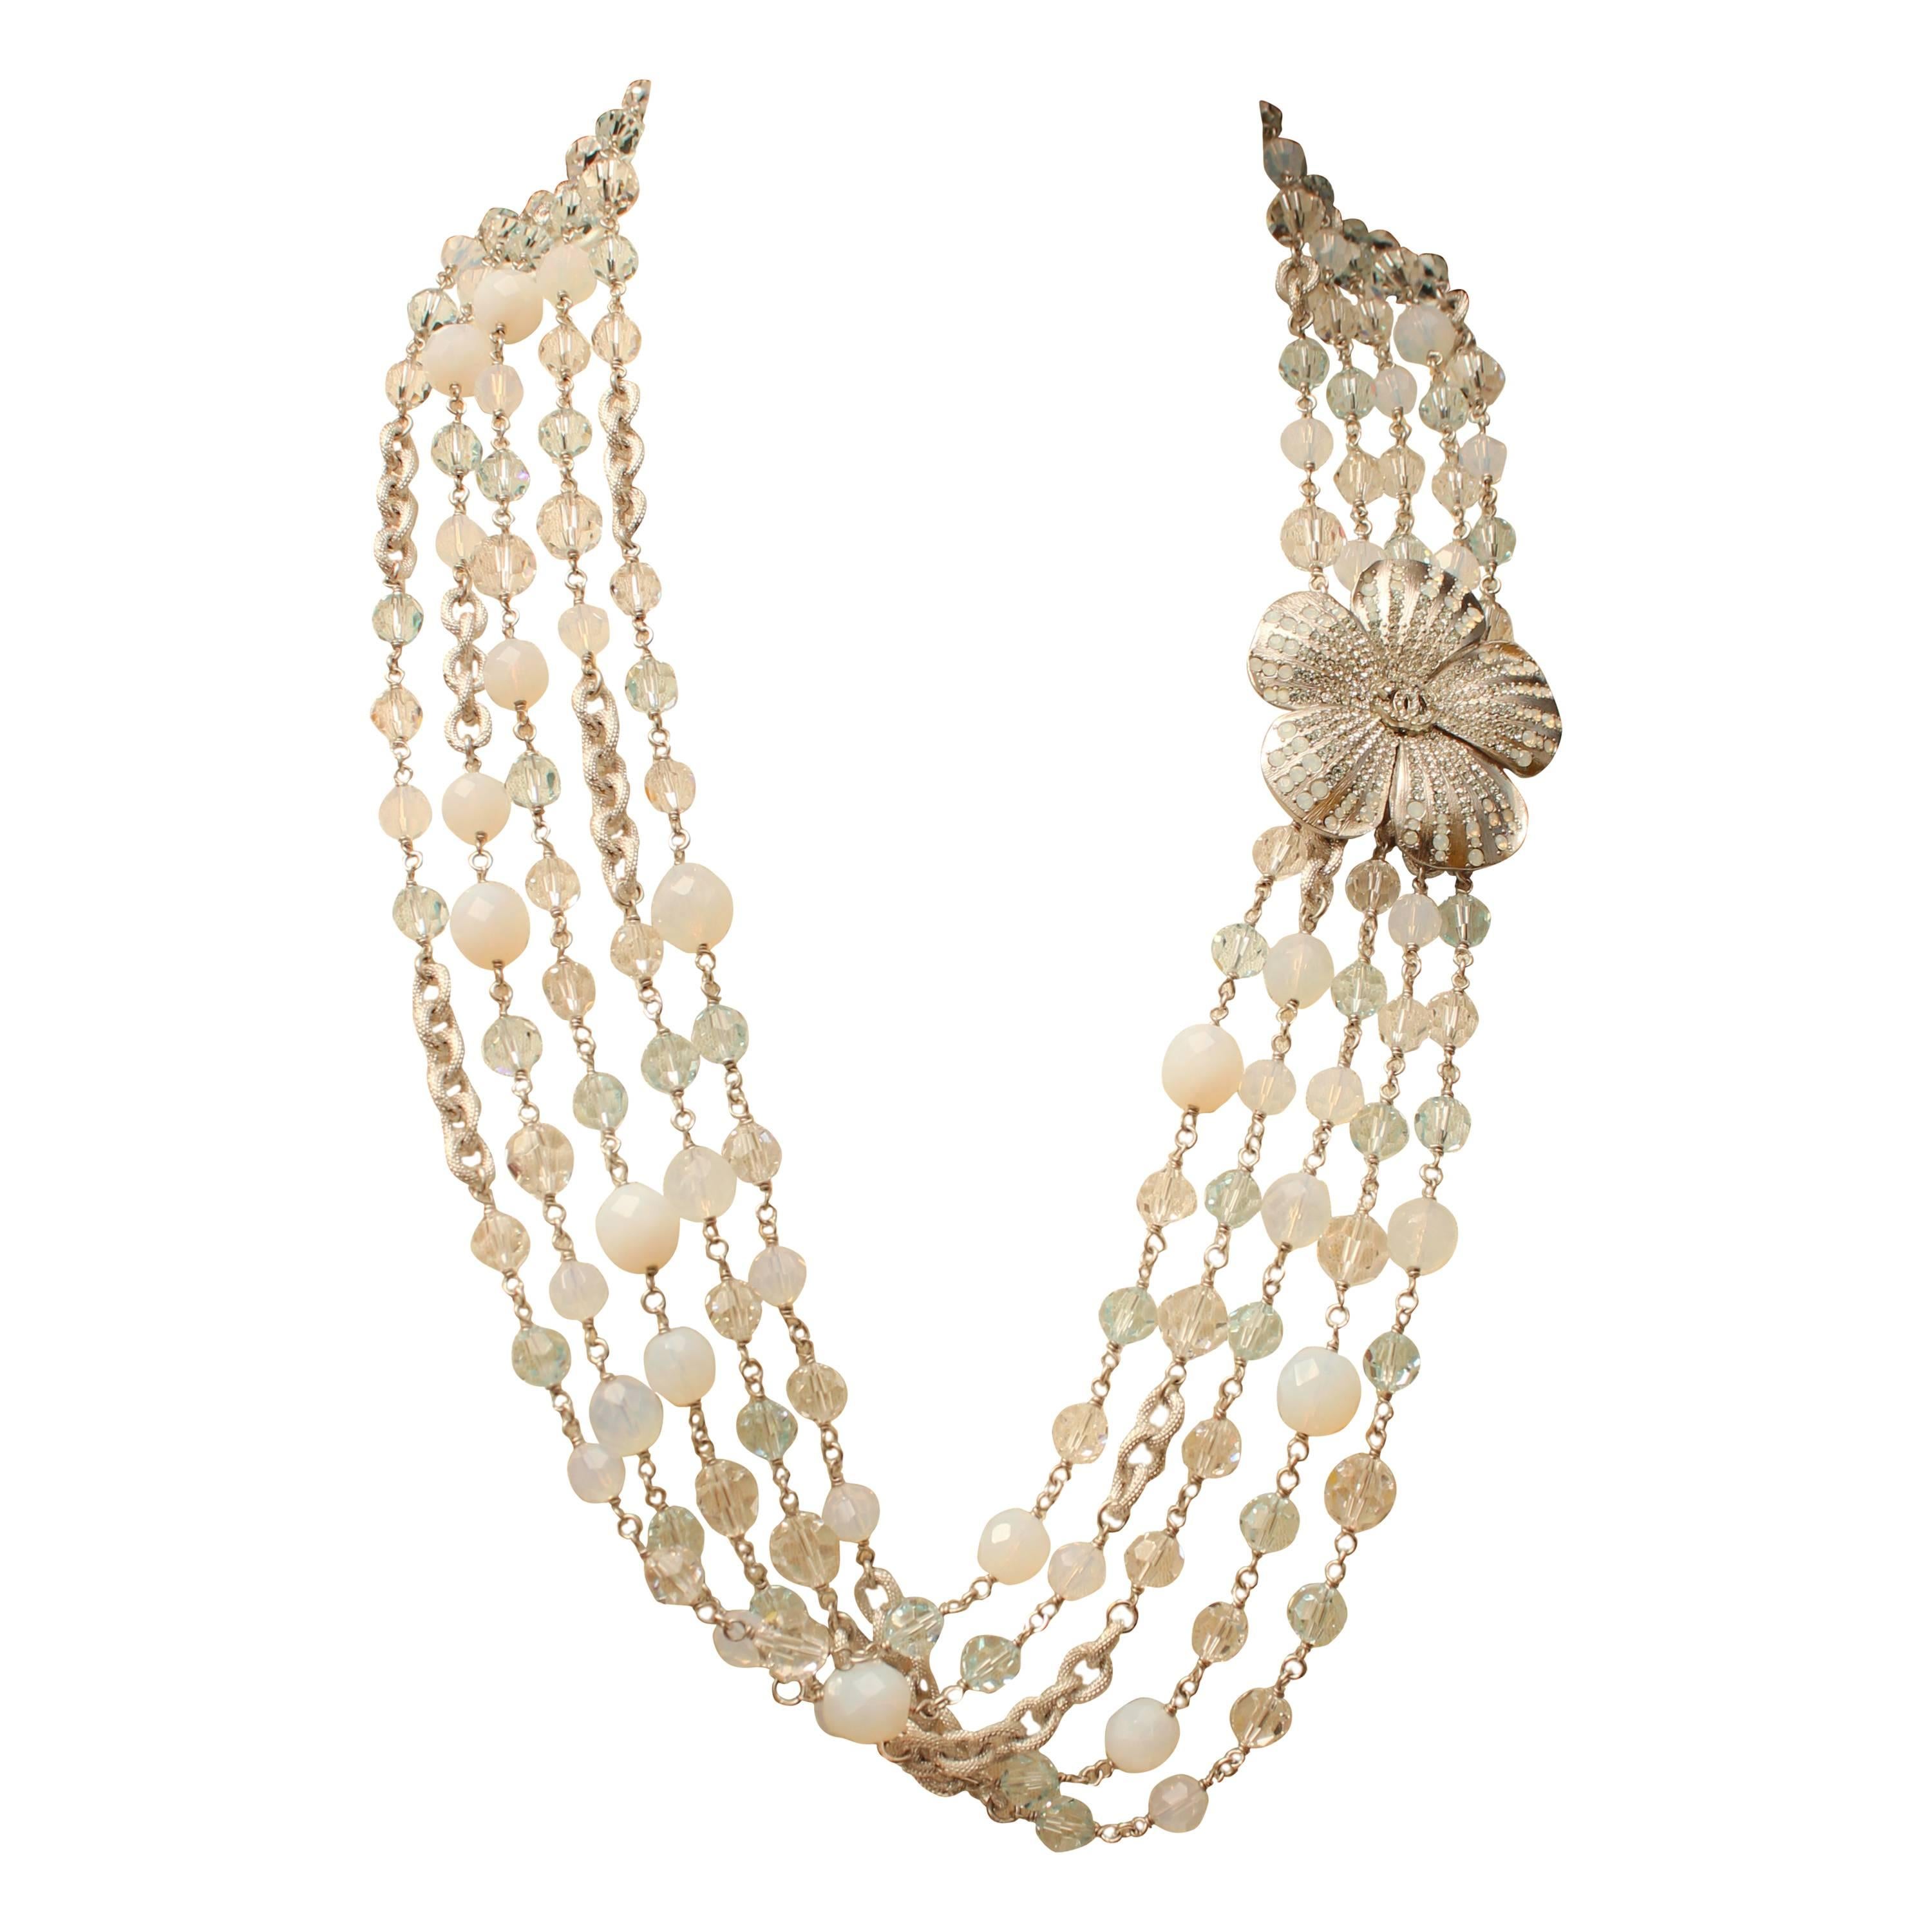 2007 Chanel Multistrands Silver Chain, White Beads and Flower Necklace